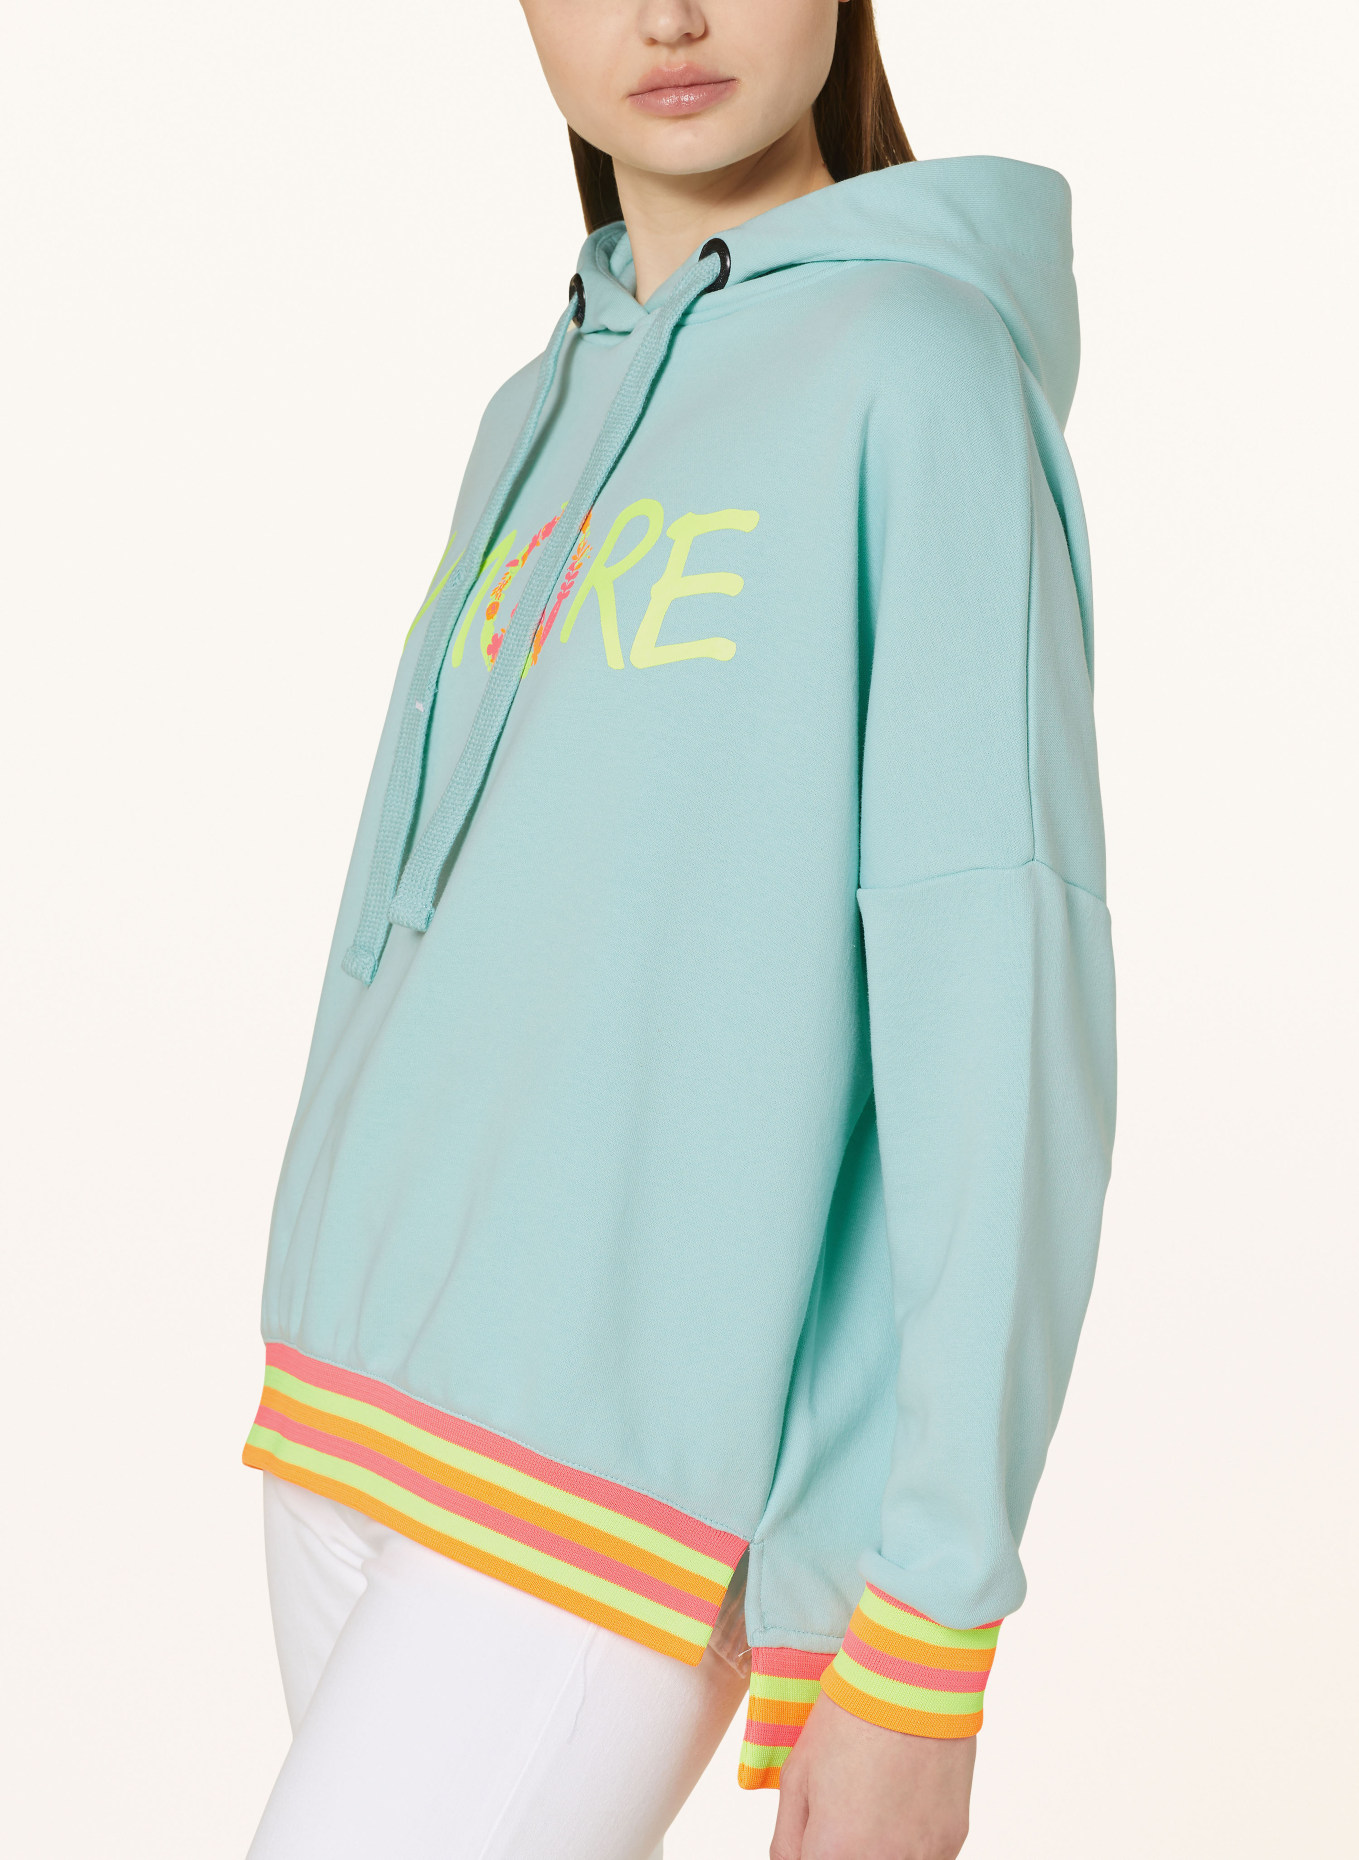 miss goodlife Hoodie AMORE PEACE, Color: TURQUOISE (Image 6)